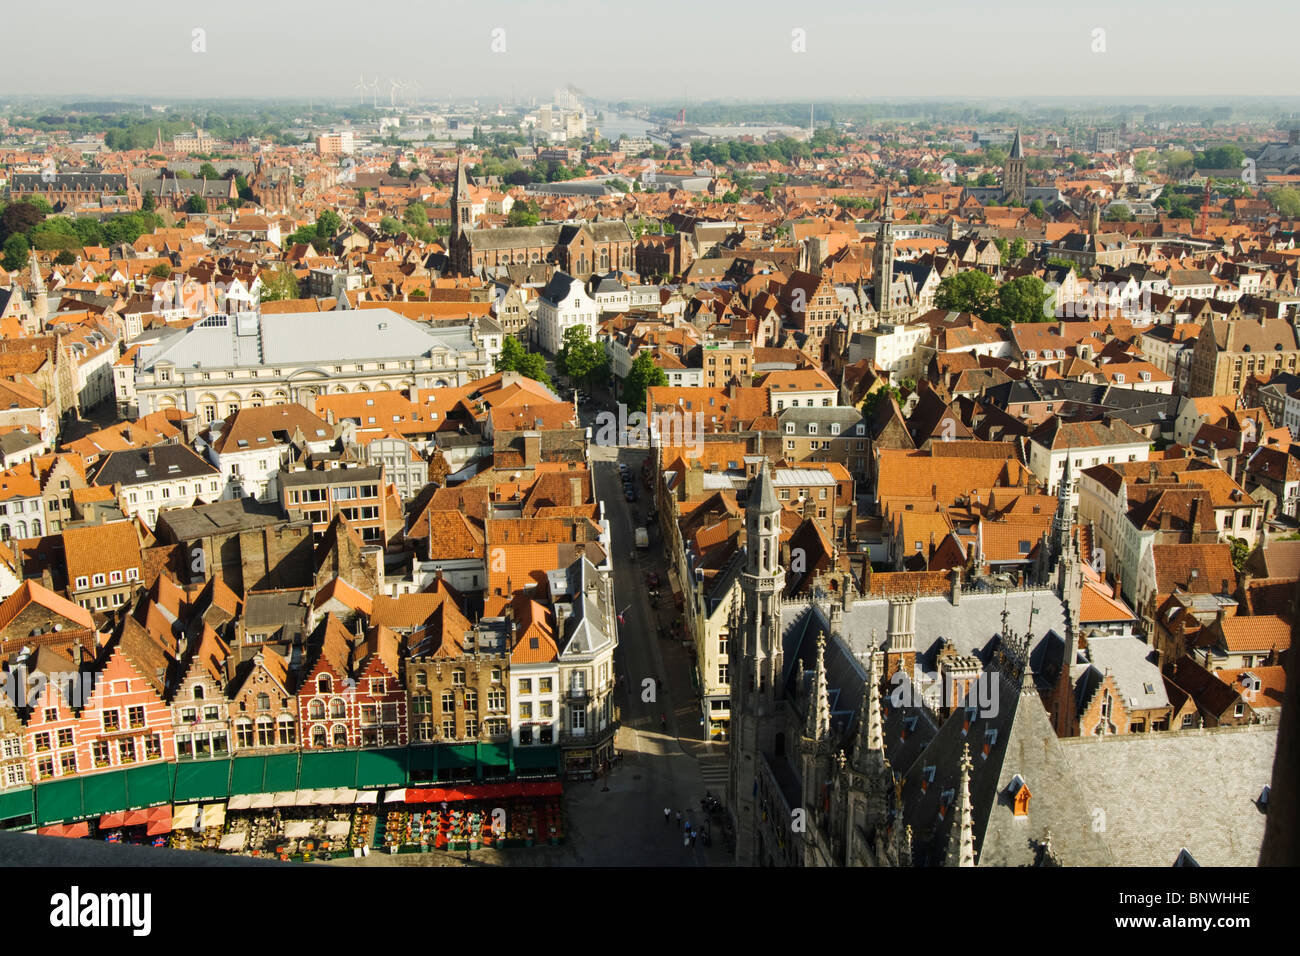 Belgium, Bruges, View of town from Belfry tower Stock Photo